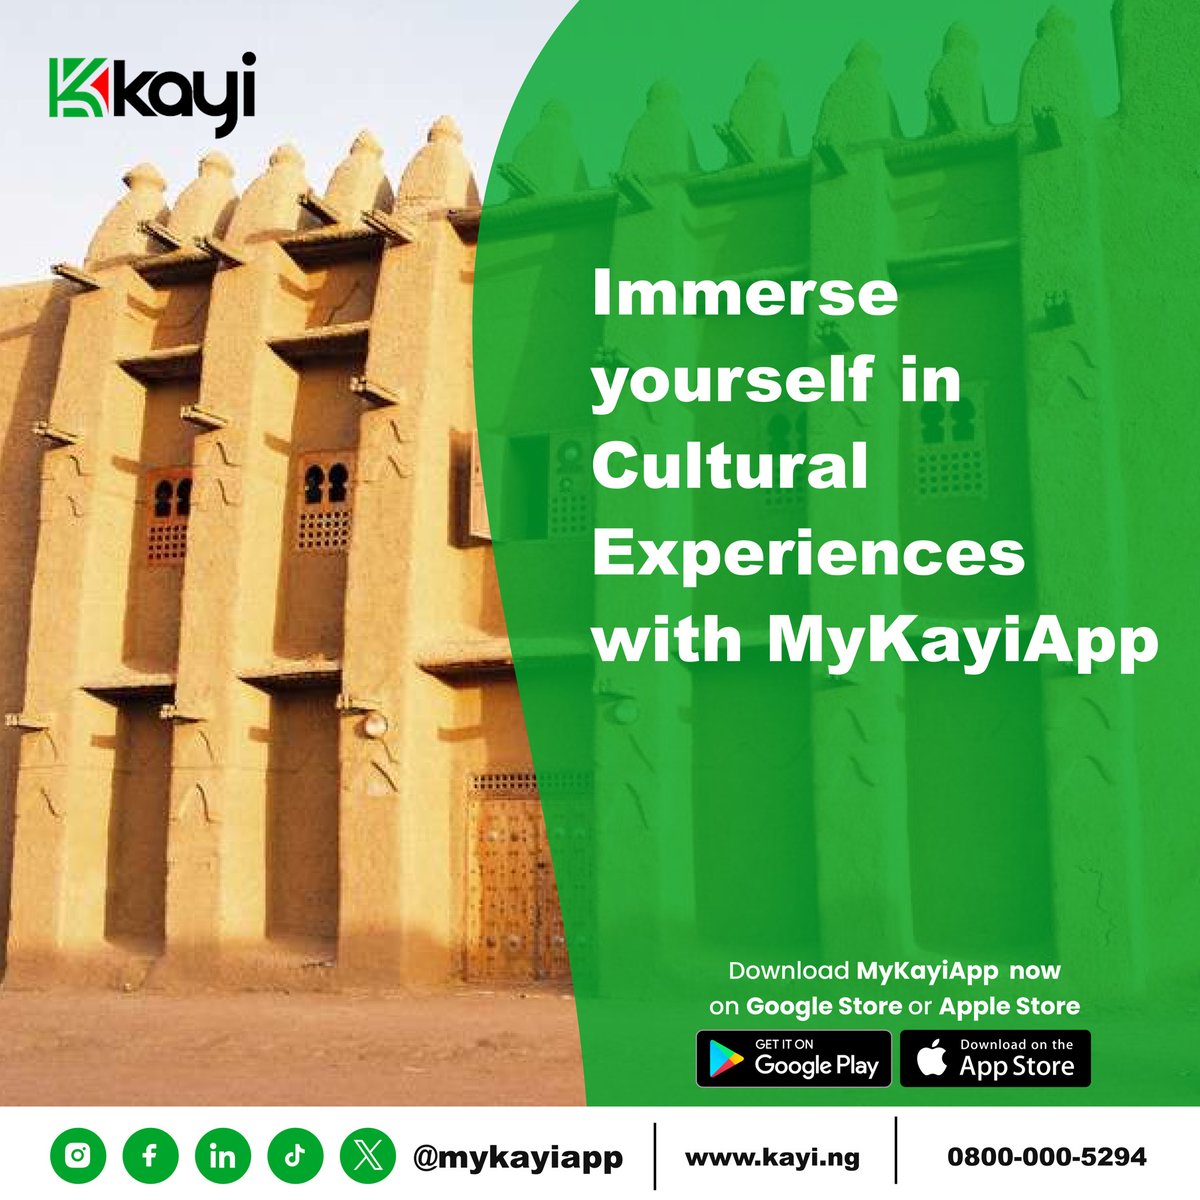 Irrespective of your cultural background or traditions, immerse yourself in the cultural experience with Kayiapp. Download now from the Google Play Store and Apple App Store to explore a wealth of cultural connections.
#MyKayiApp #NowLive #Kayiway #DownloadNow #downloadmykayiapp